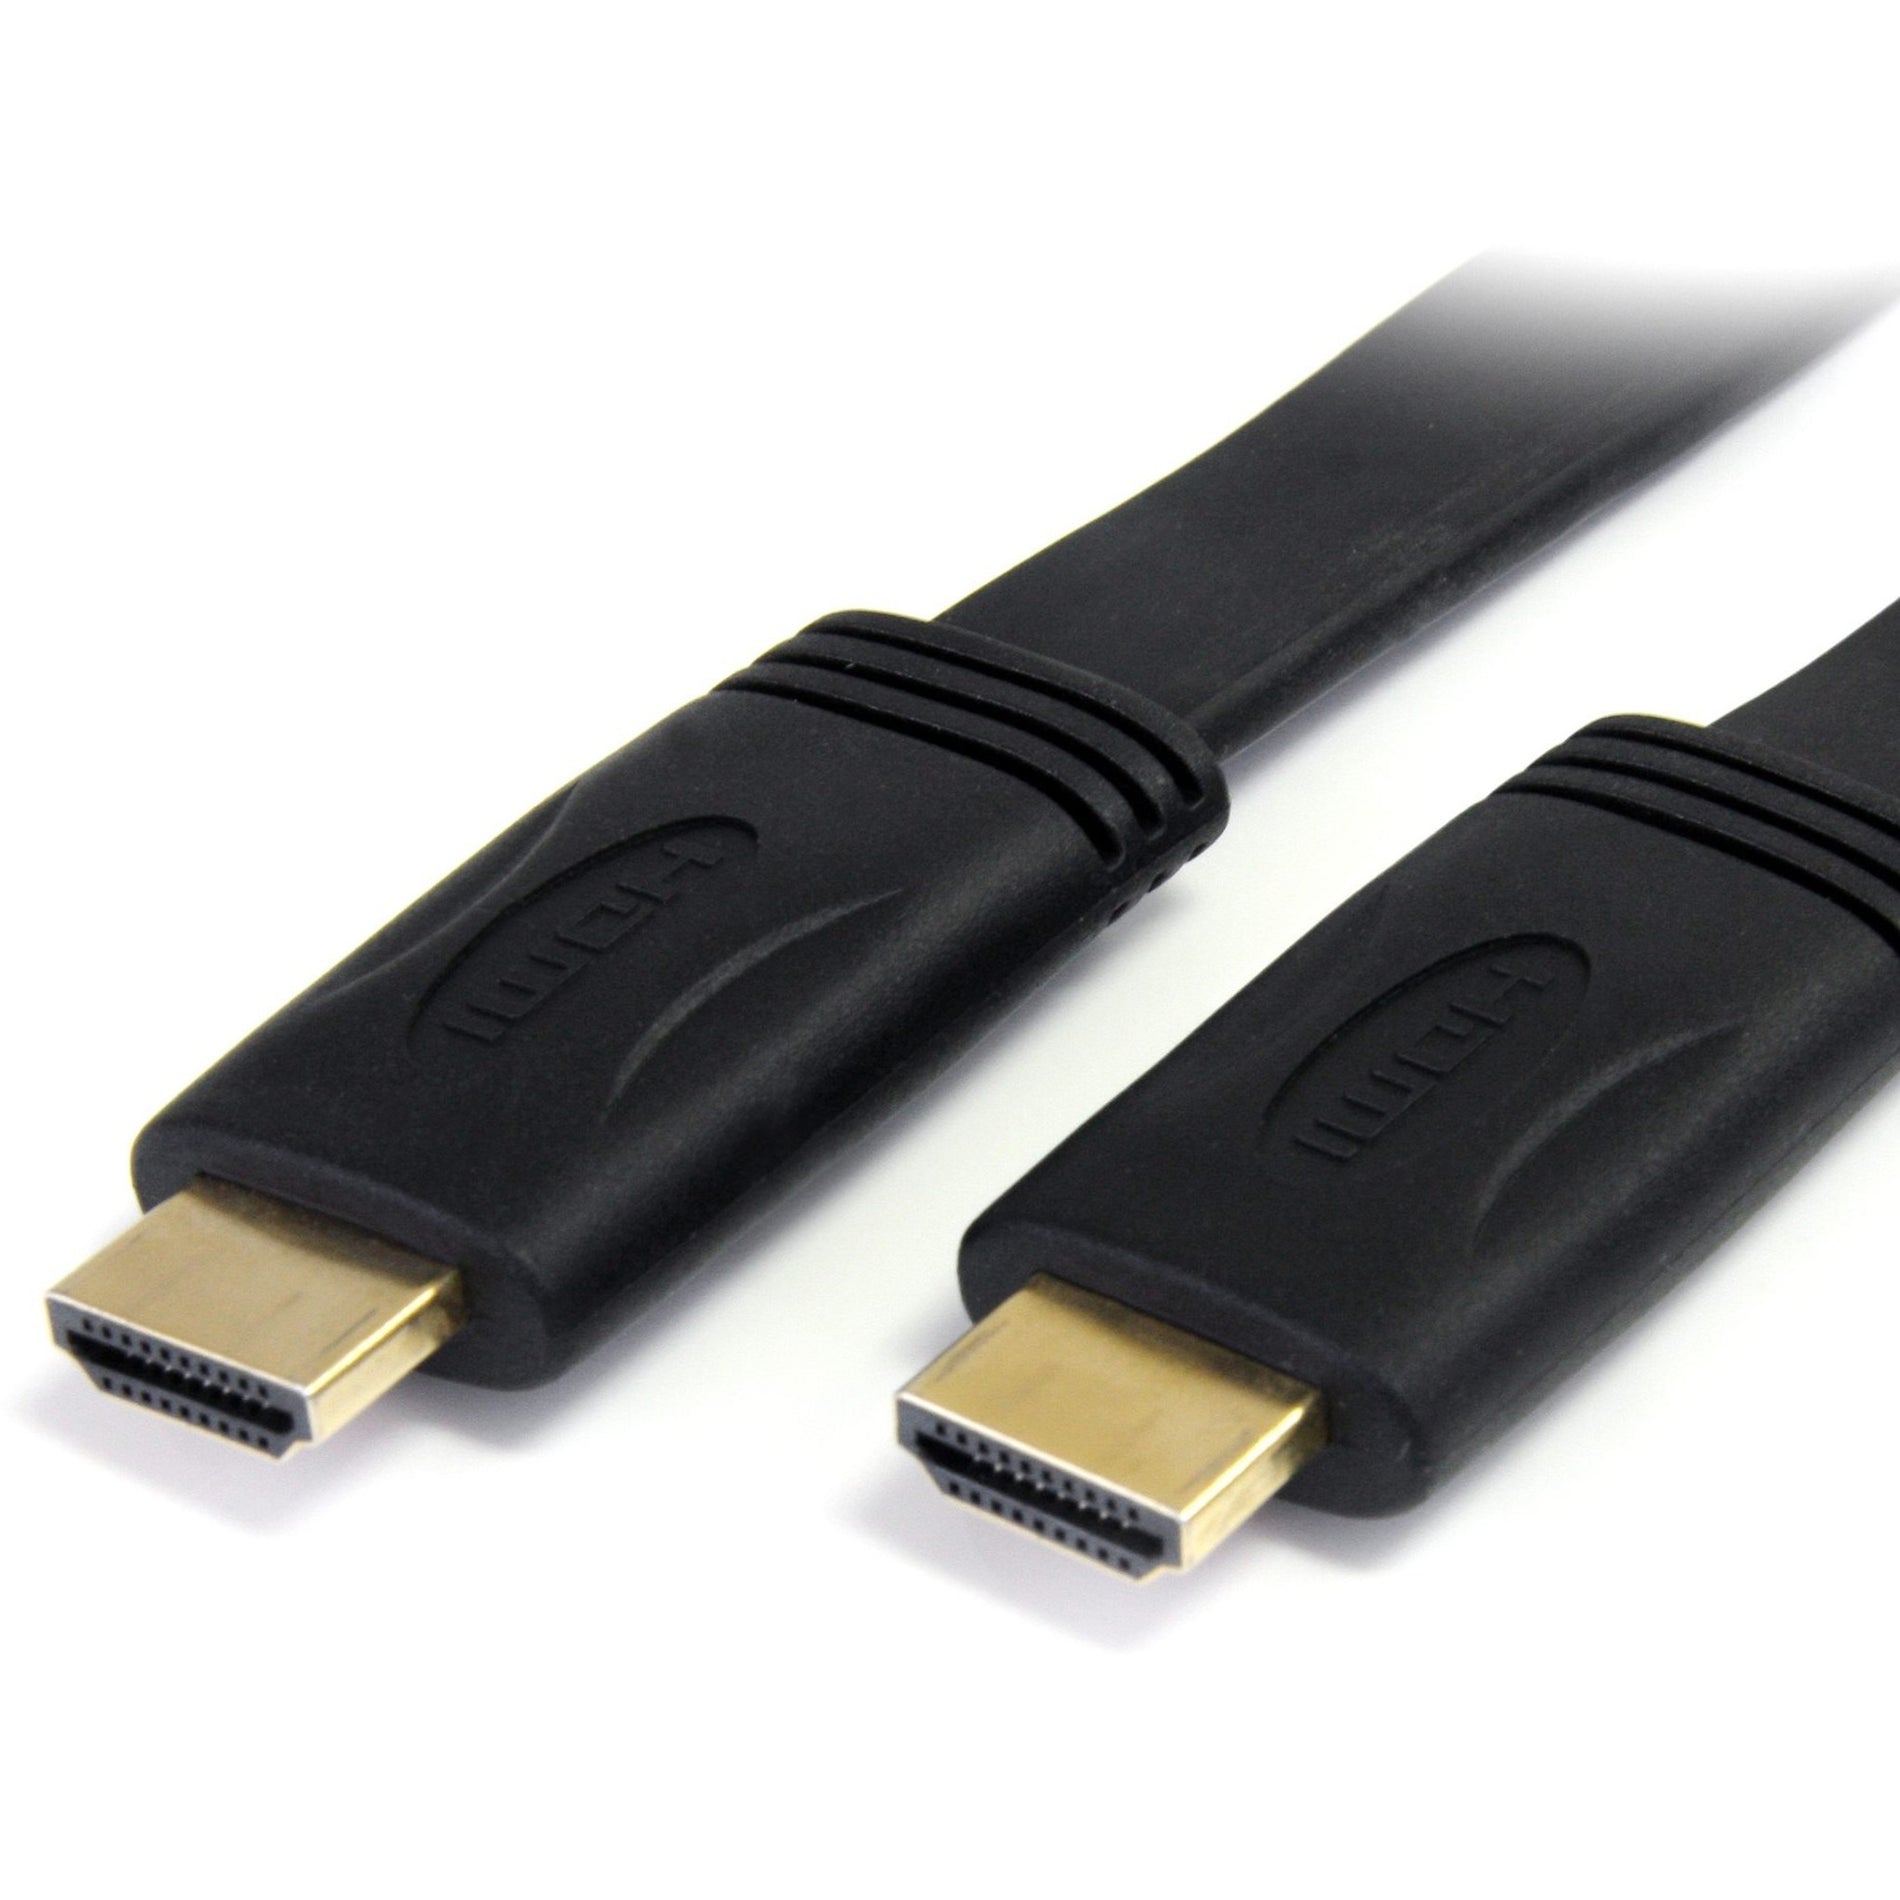 StarTech.com HDMIMM15FL 15 ft High Speed Flat HDMI Digital Video Cable with Ethernet, 4K Supported, Gold Plated Connectors, Black